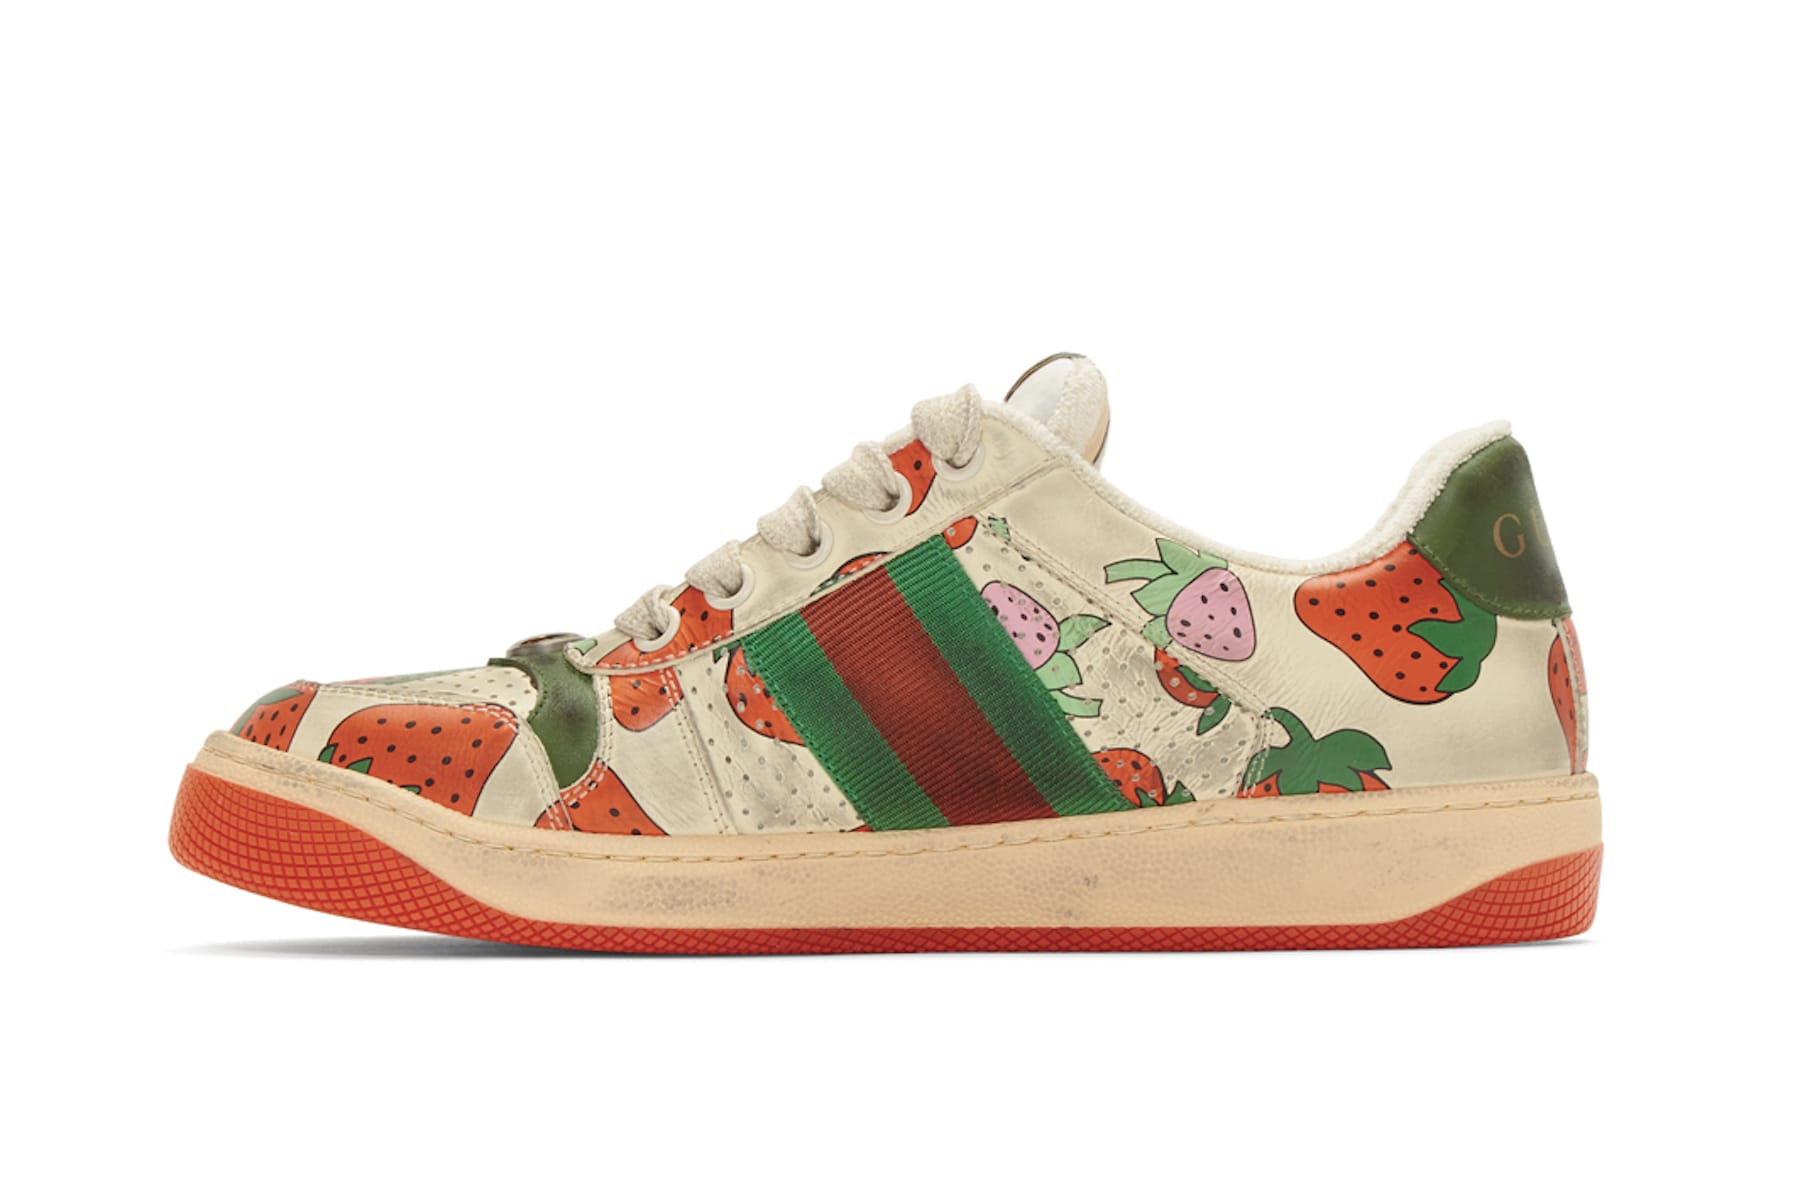 gucci shoes with strawberries